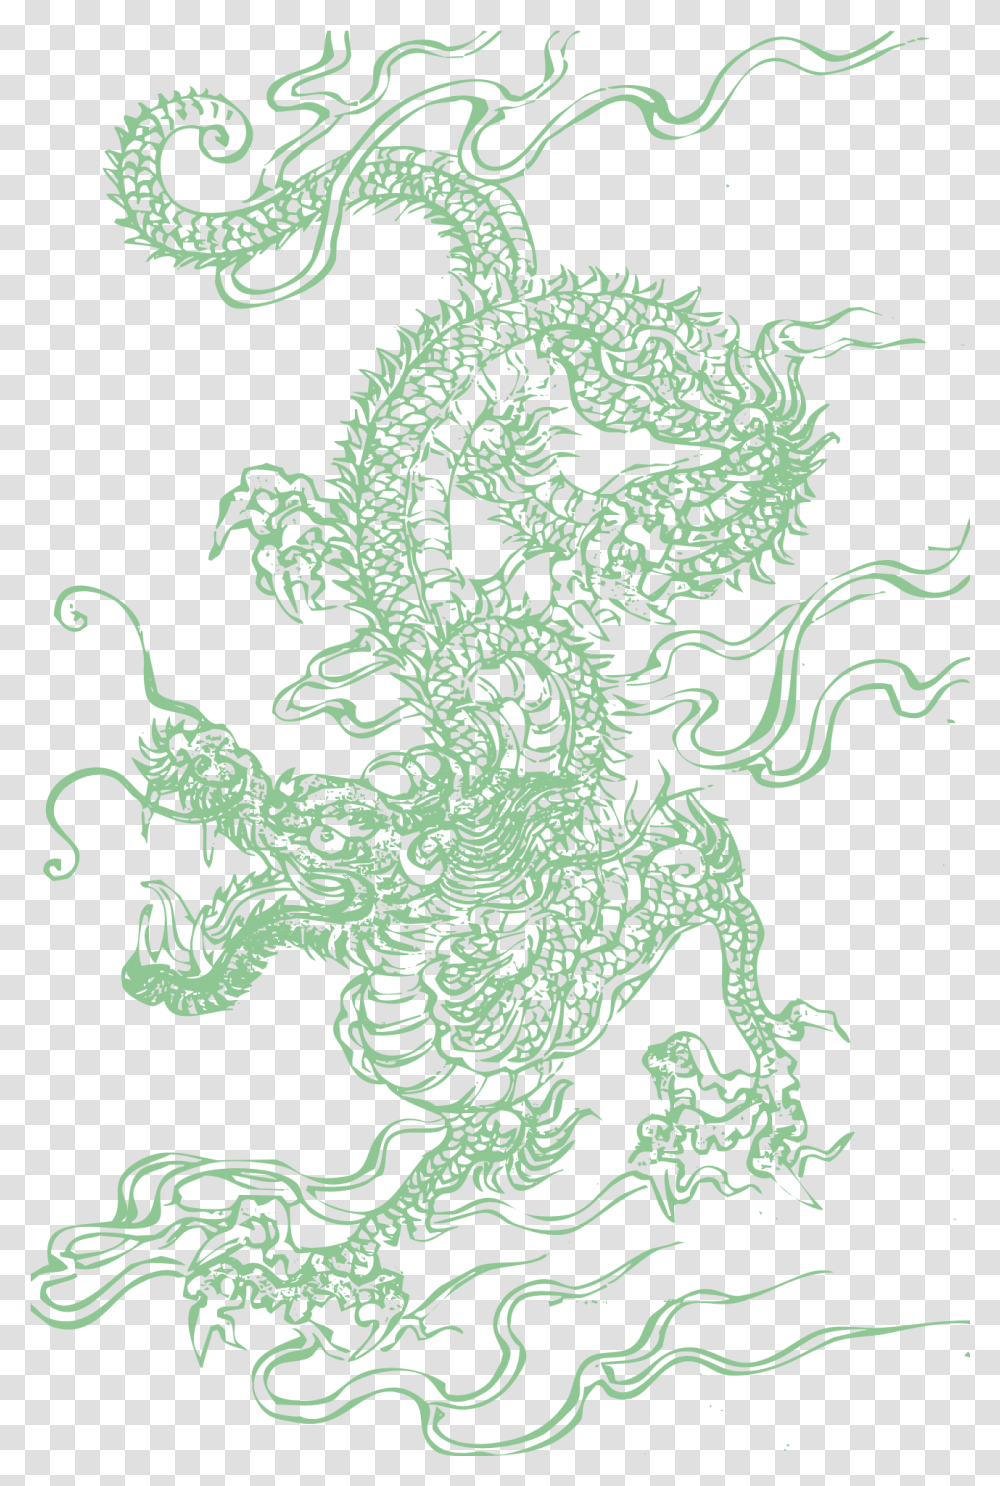 Dragon Pictures Free Icons And Backgrounds Story Of The Chinese Dragon, Pattern, Paisley, Ornament, Fractal Transparent Png